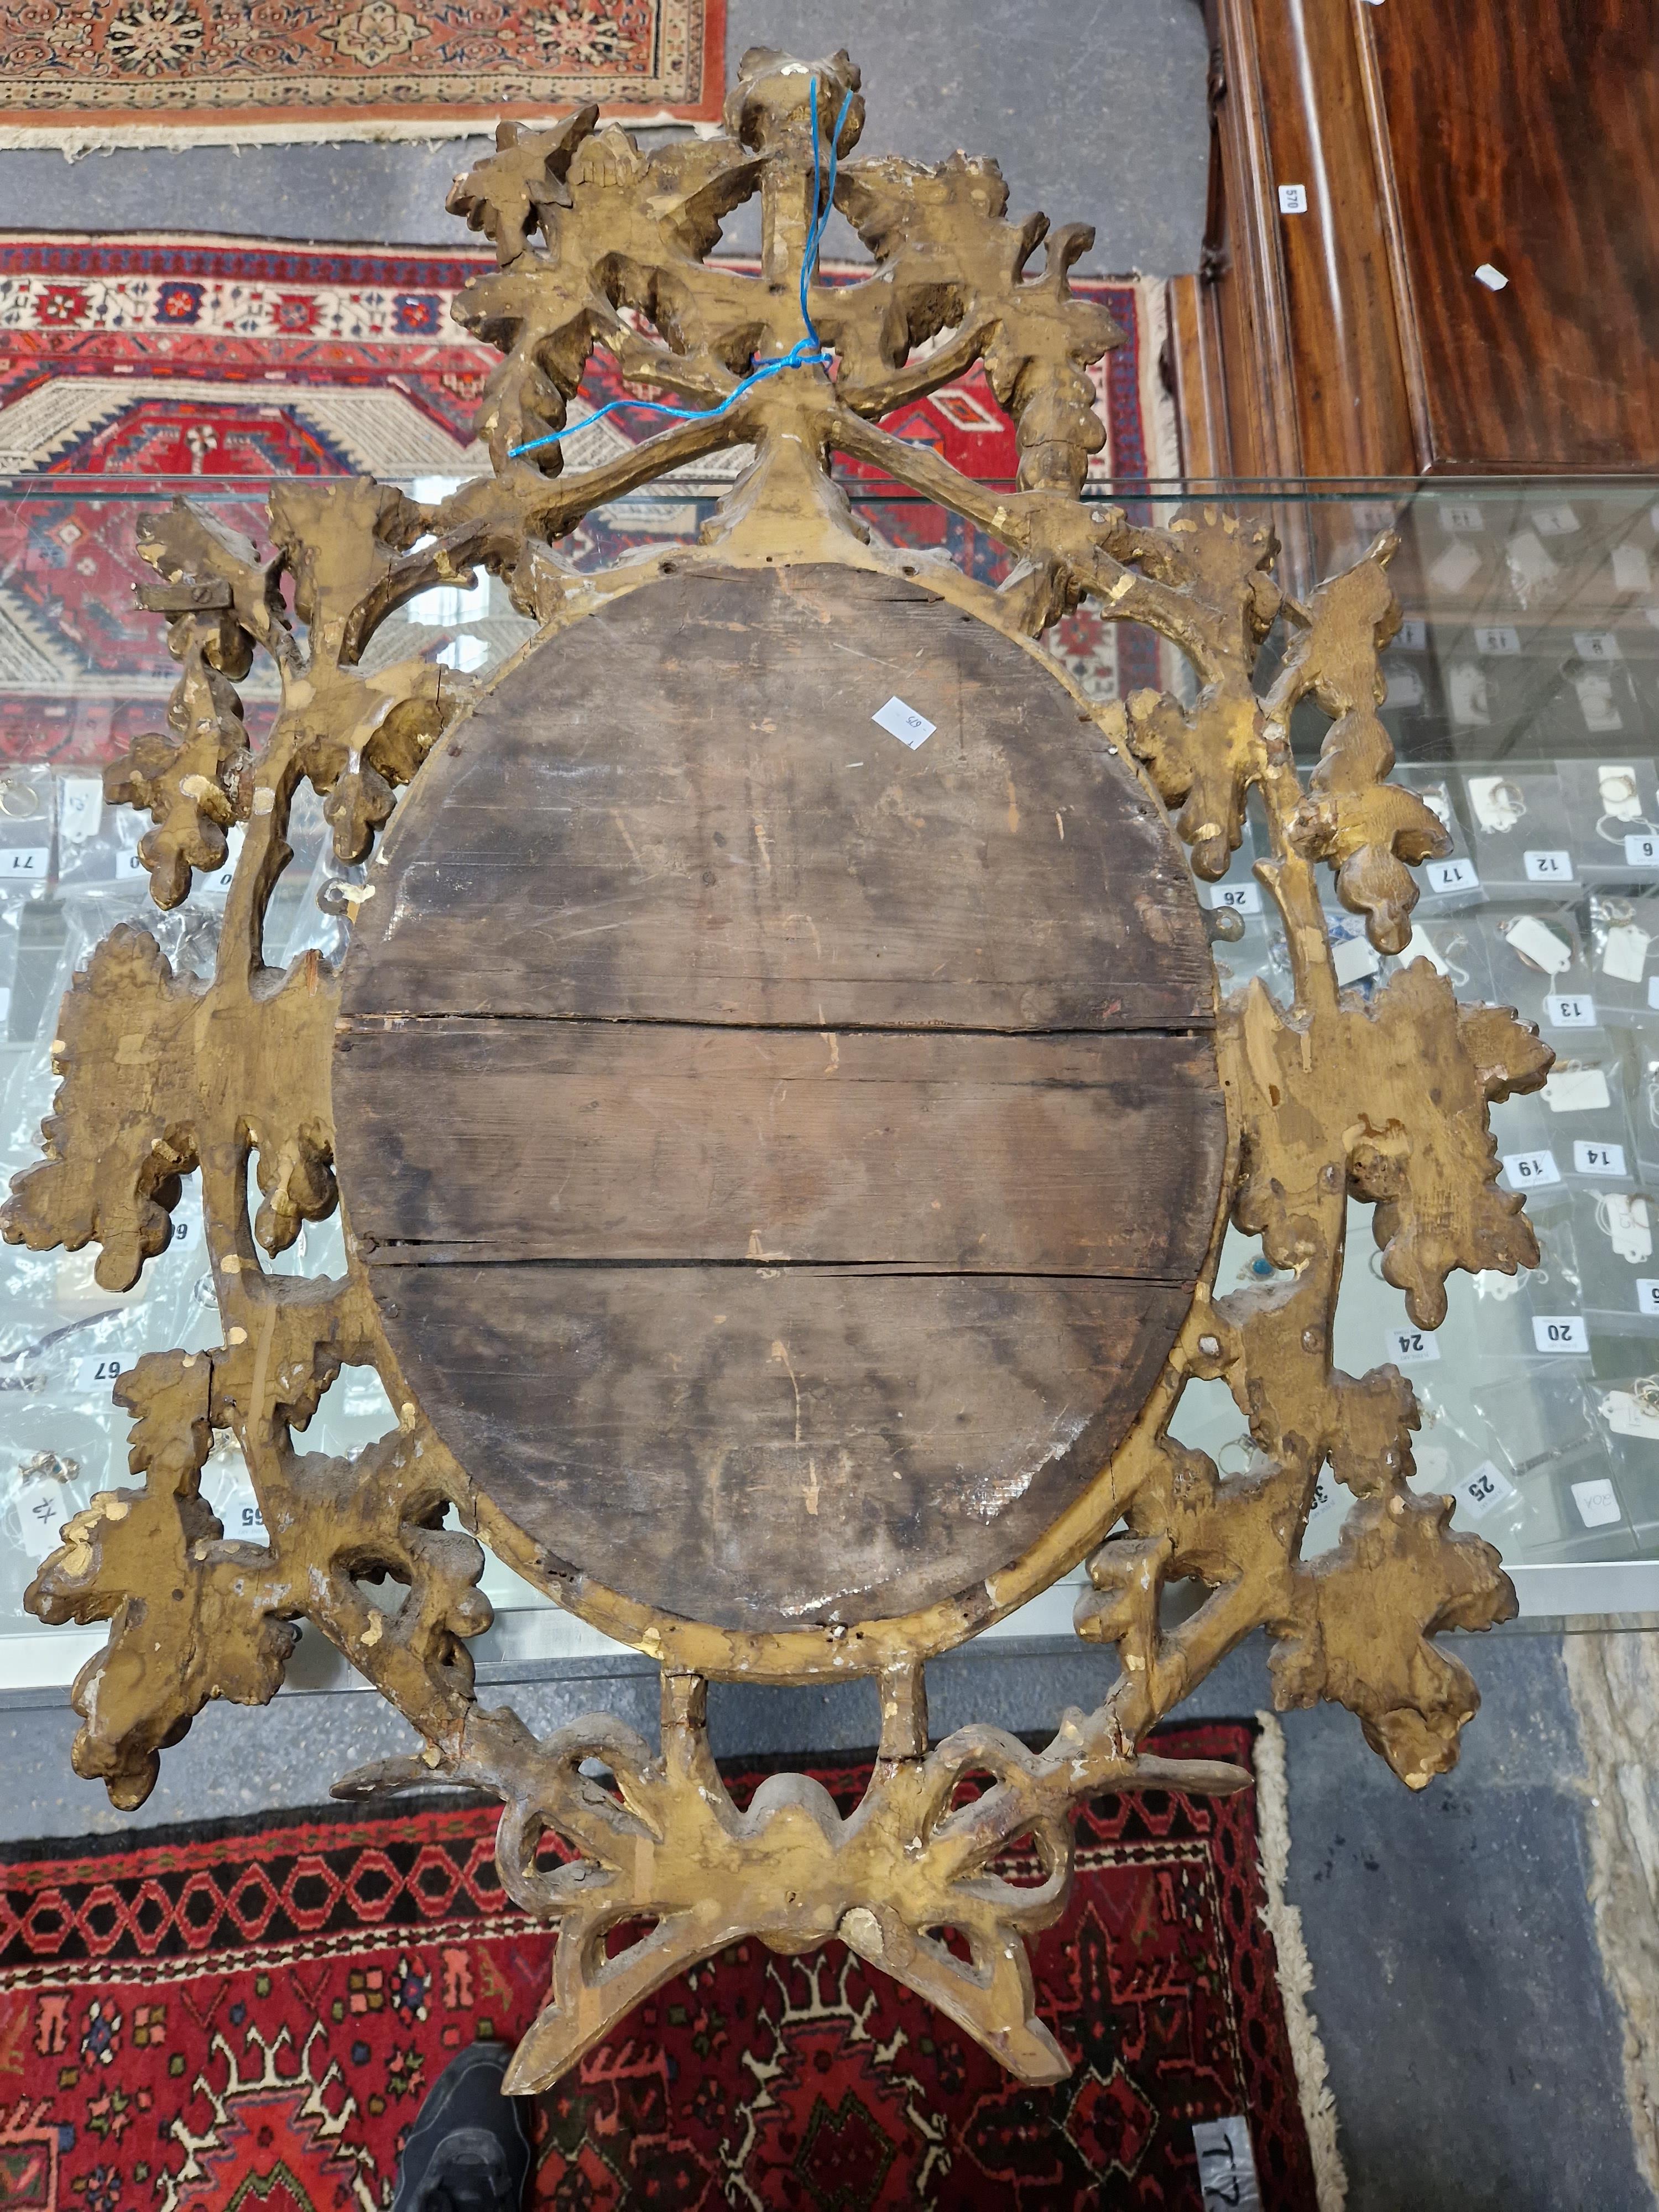 AN OVAL MIRROR IN A LATE 18th C. GILT FRAME PIERCED AND CARVED WITH GRAPE VINES. 95 x 64cms. - Image 12 of 12